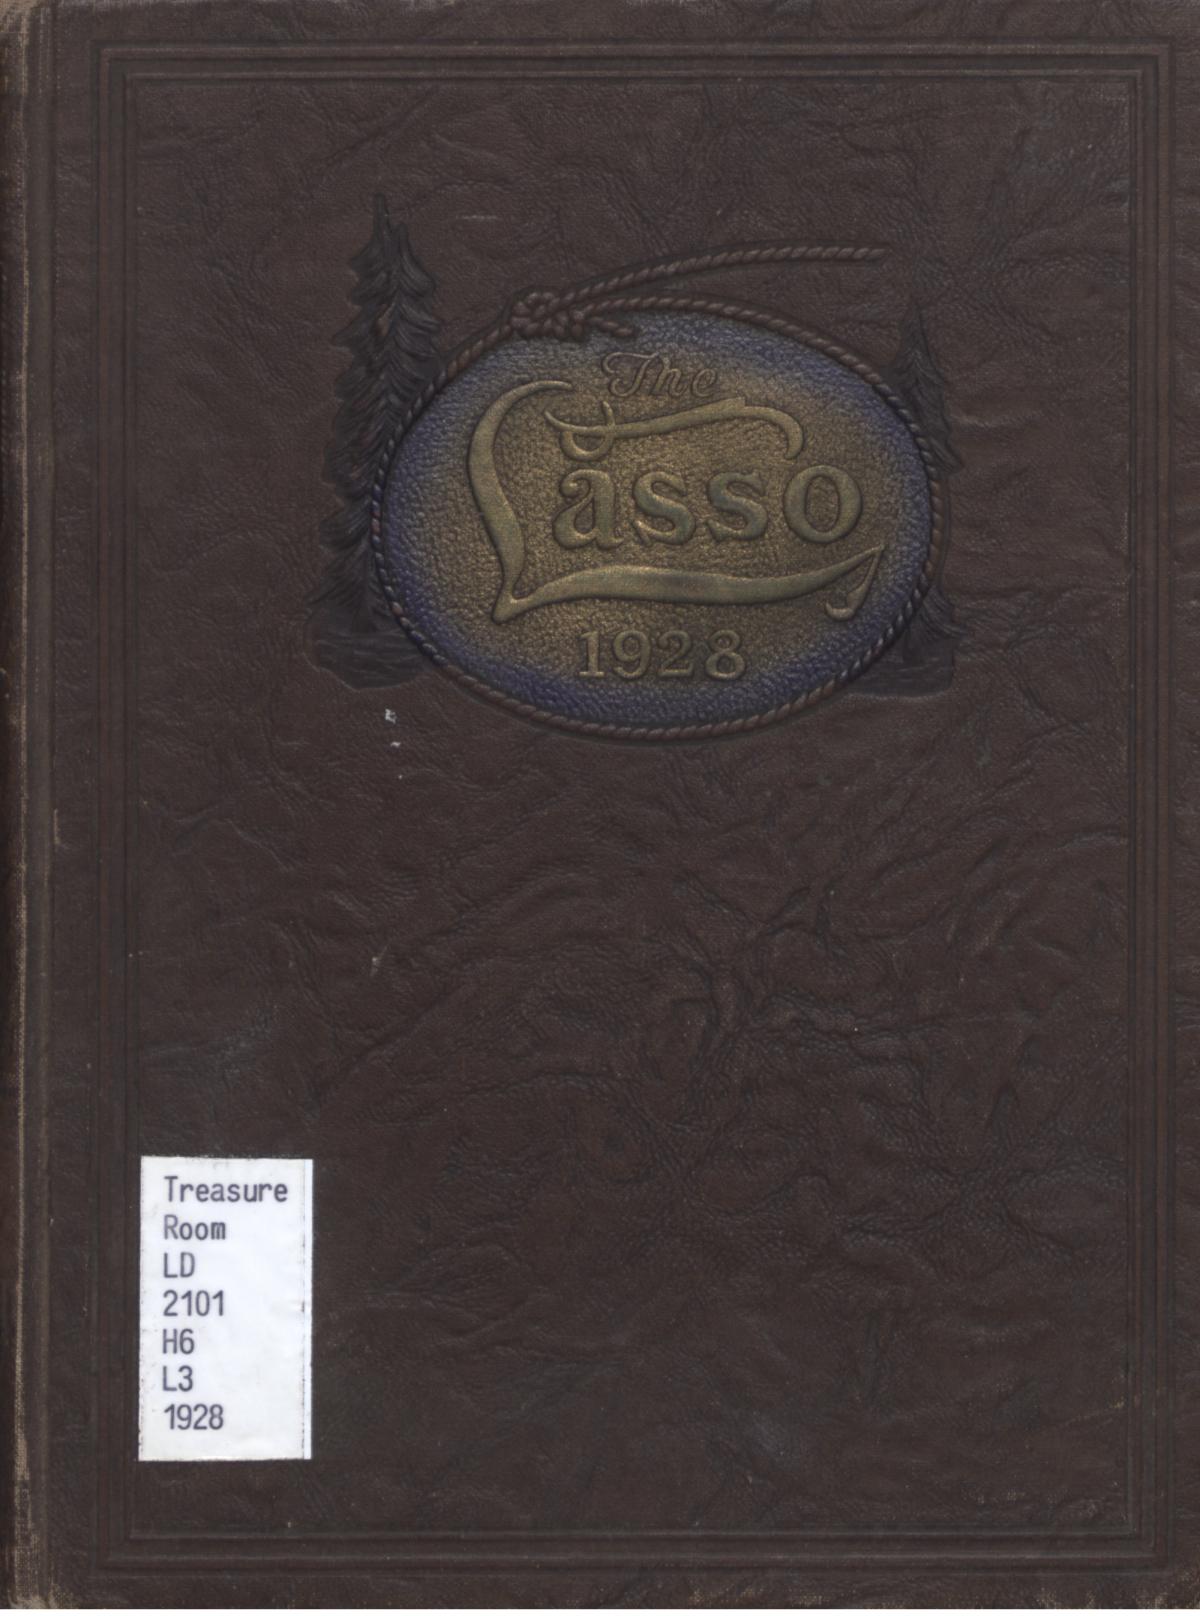 The Lasso, Yearbook of Howard Payne College, 1928
                                                
                                                    Front Cover
                                                